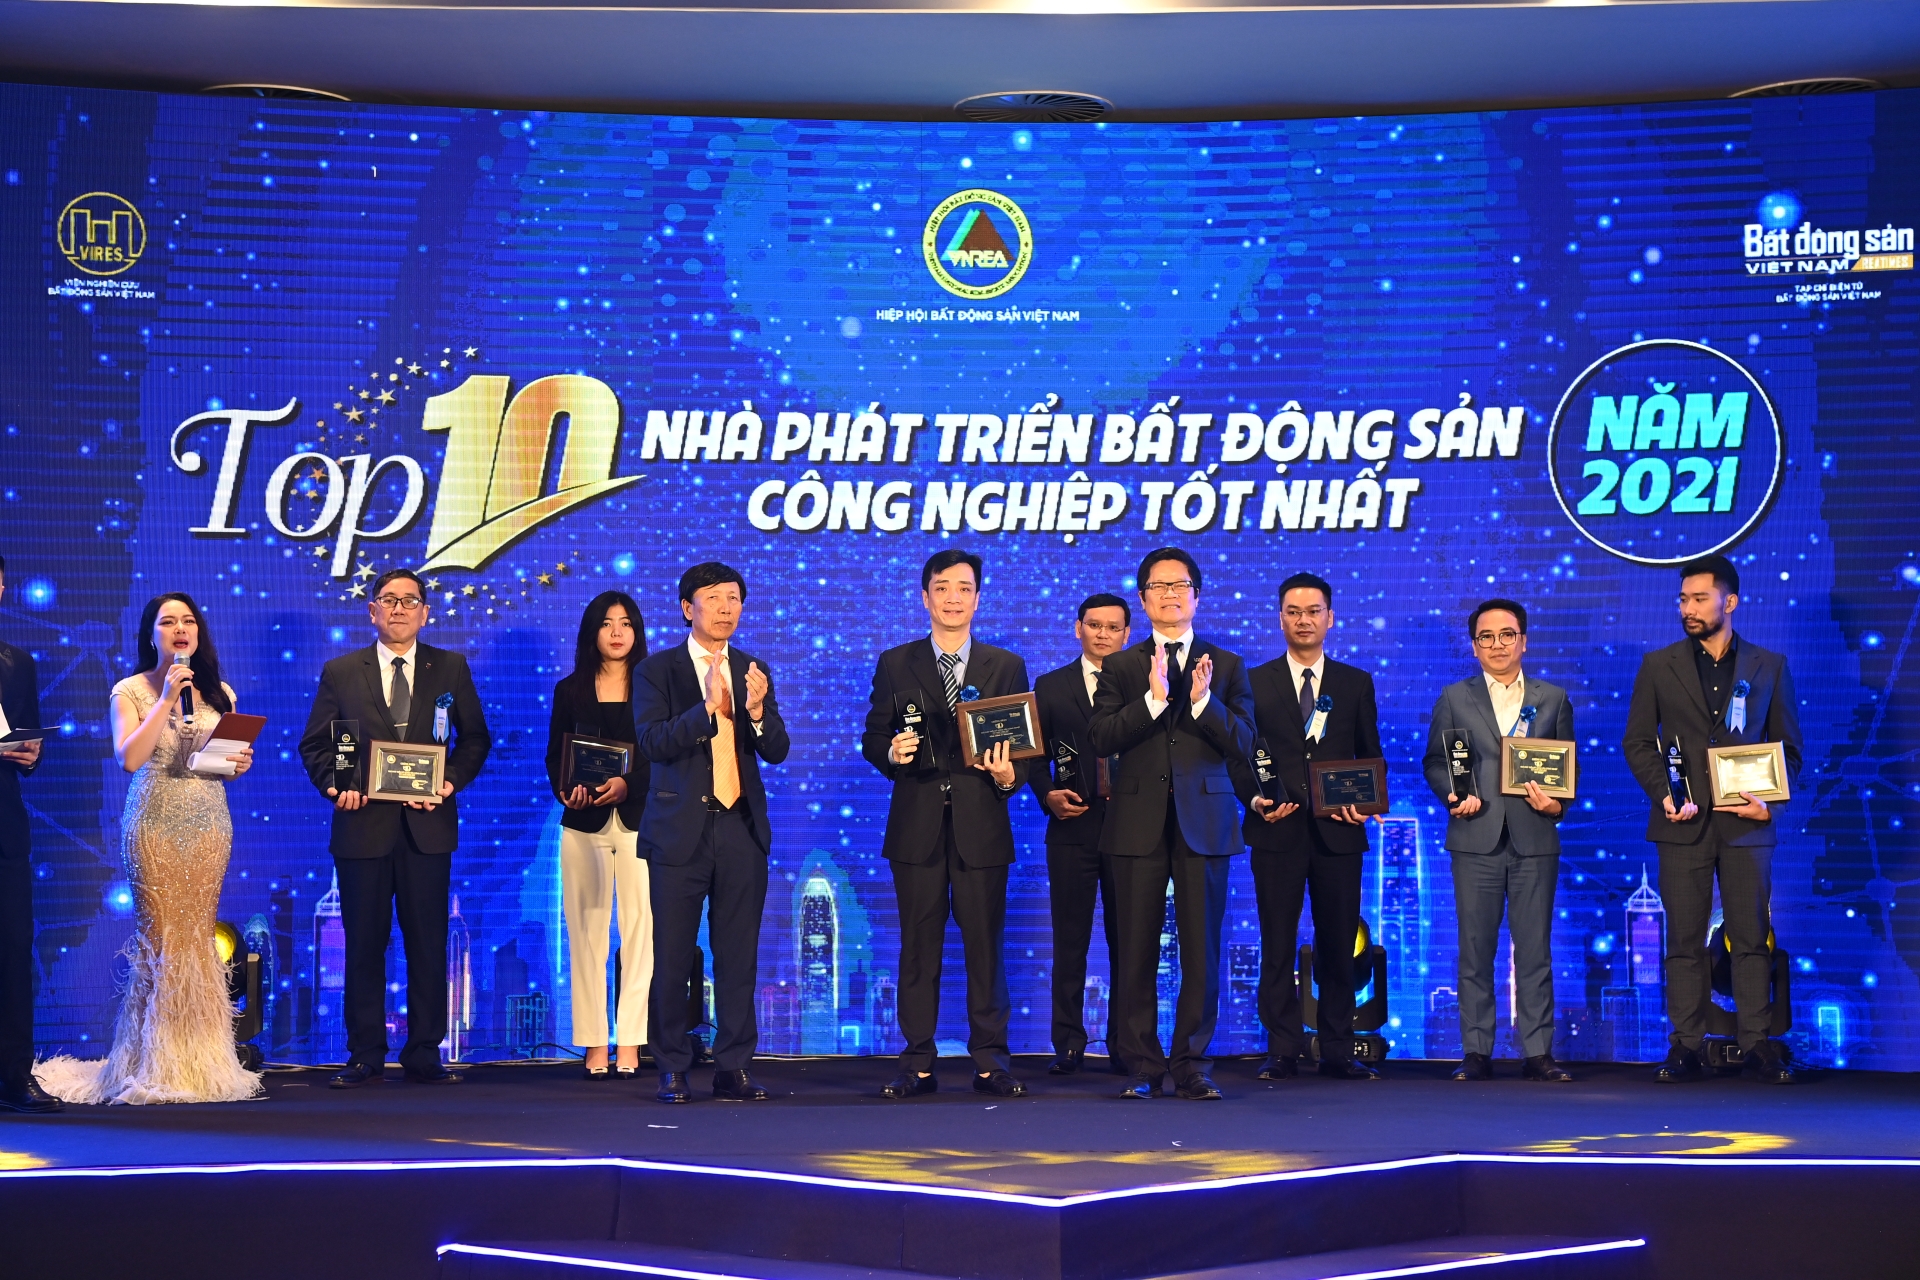 Viglacera is honored to receive the award of Top 10 best industrial real estate developers in 2021